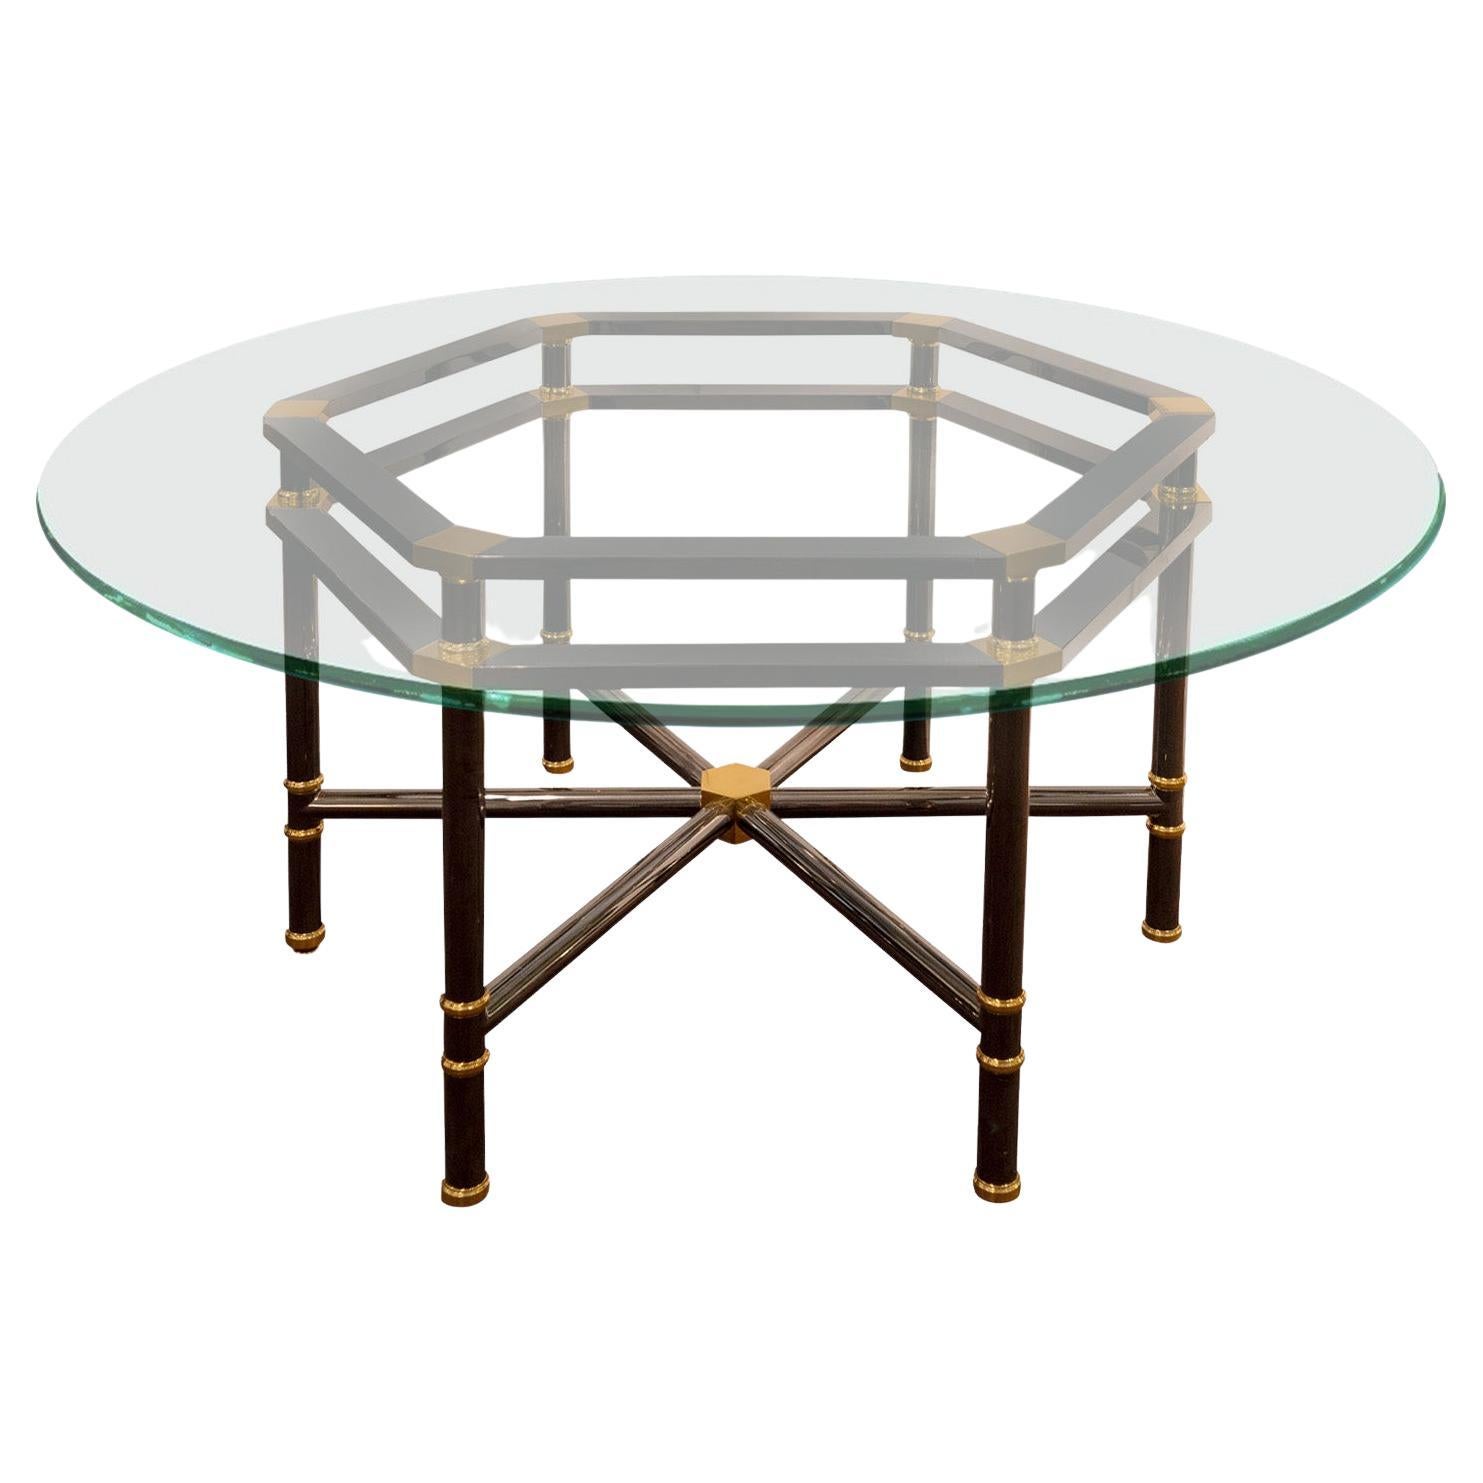 Karl Springer Jansen Style Dining Table in Polished Gunmetal and Brass 1980s For Sale